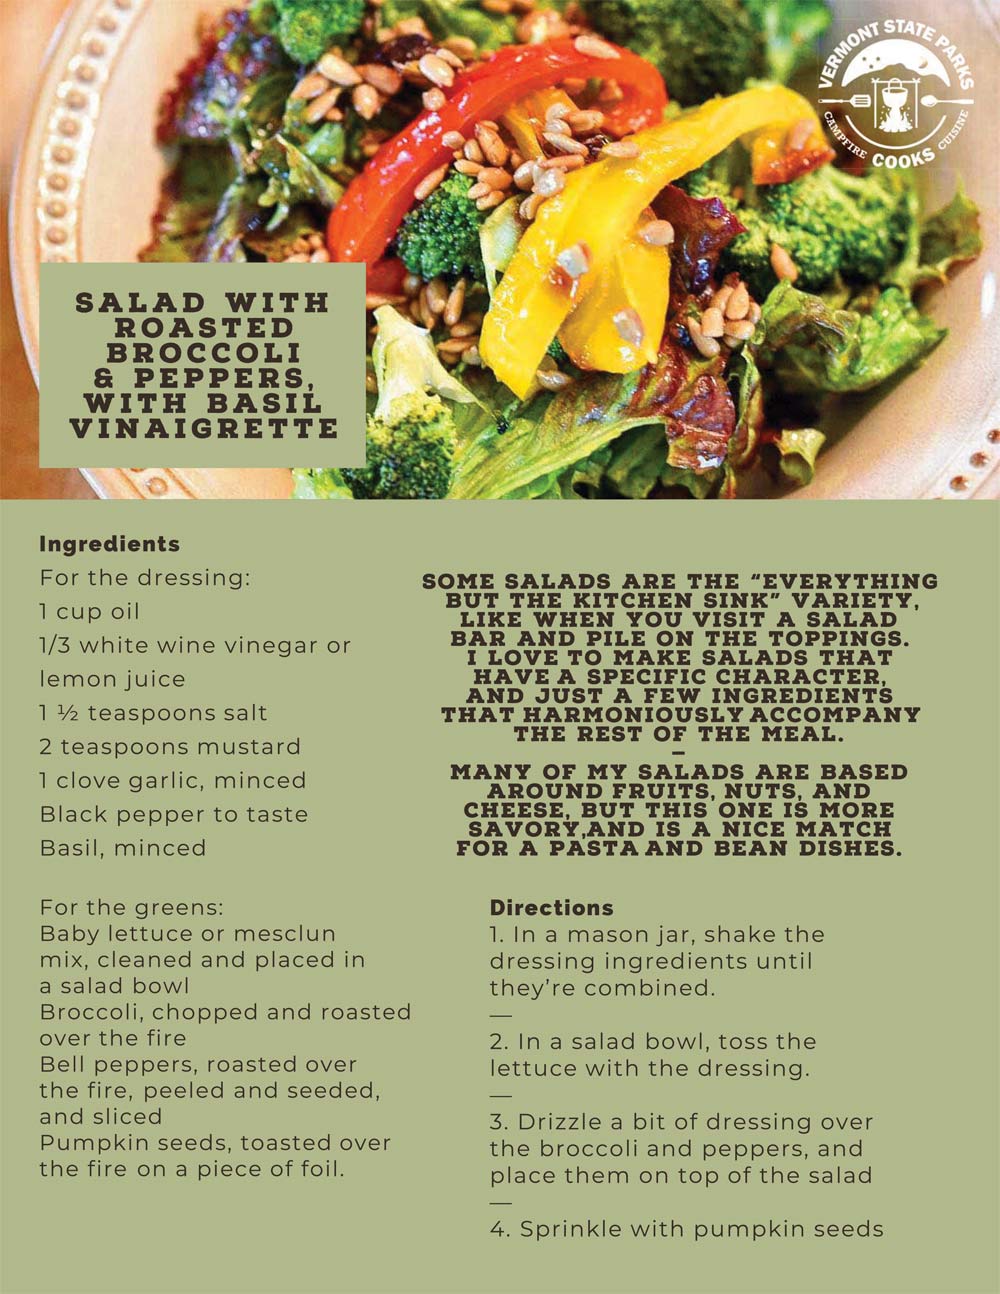 Salad with Roasted Broccoli & Peppers with Basil Vinaigrette